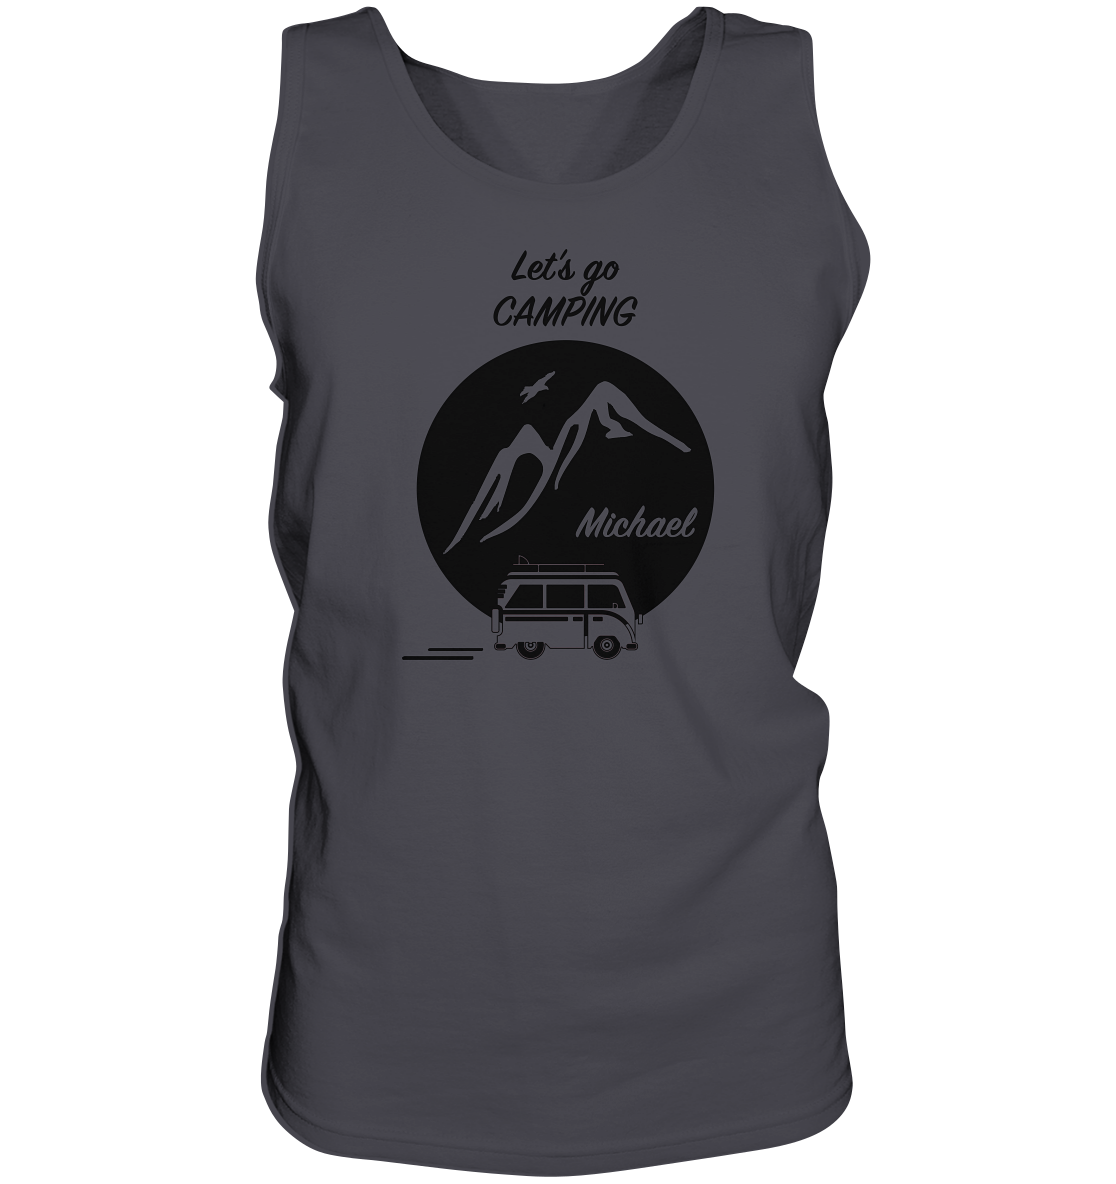 Let's go CAMPING - Tank-Top